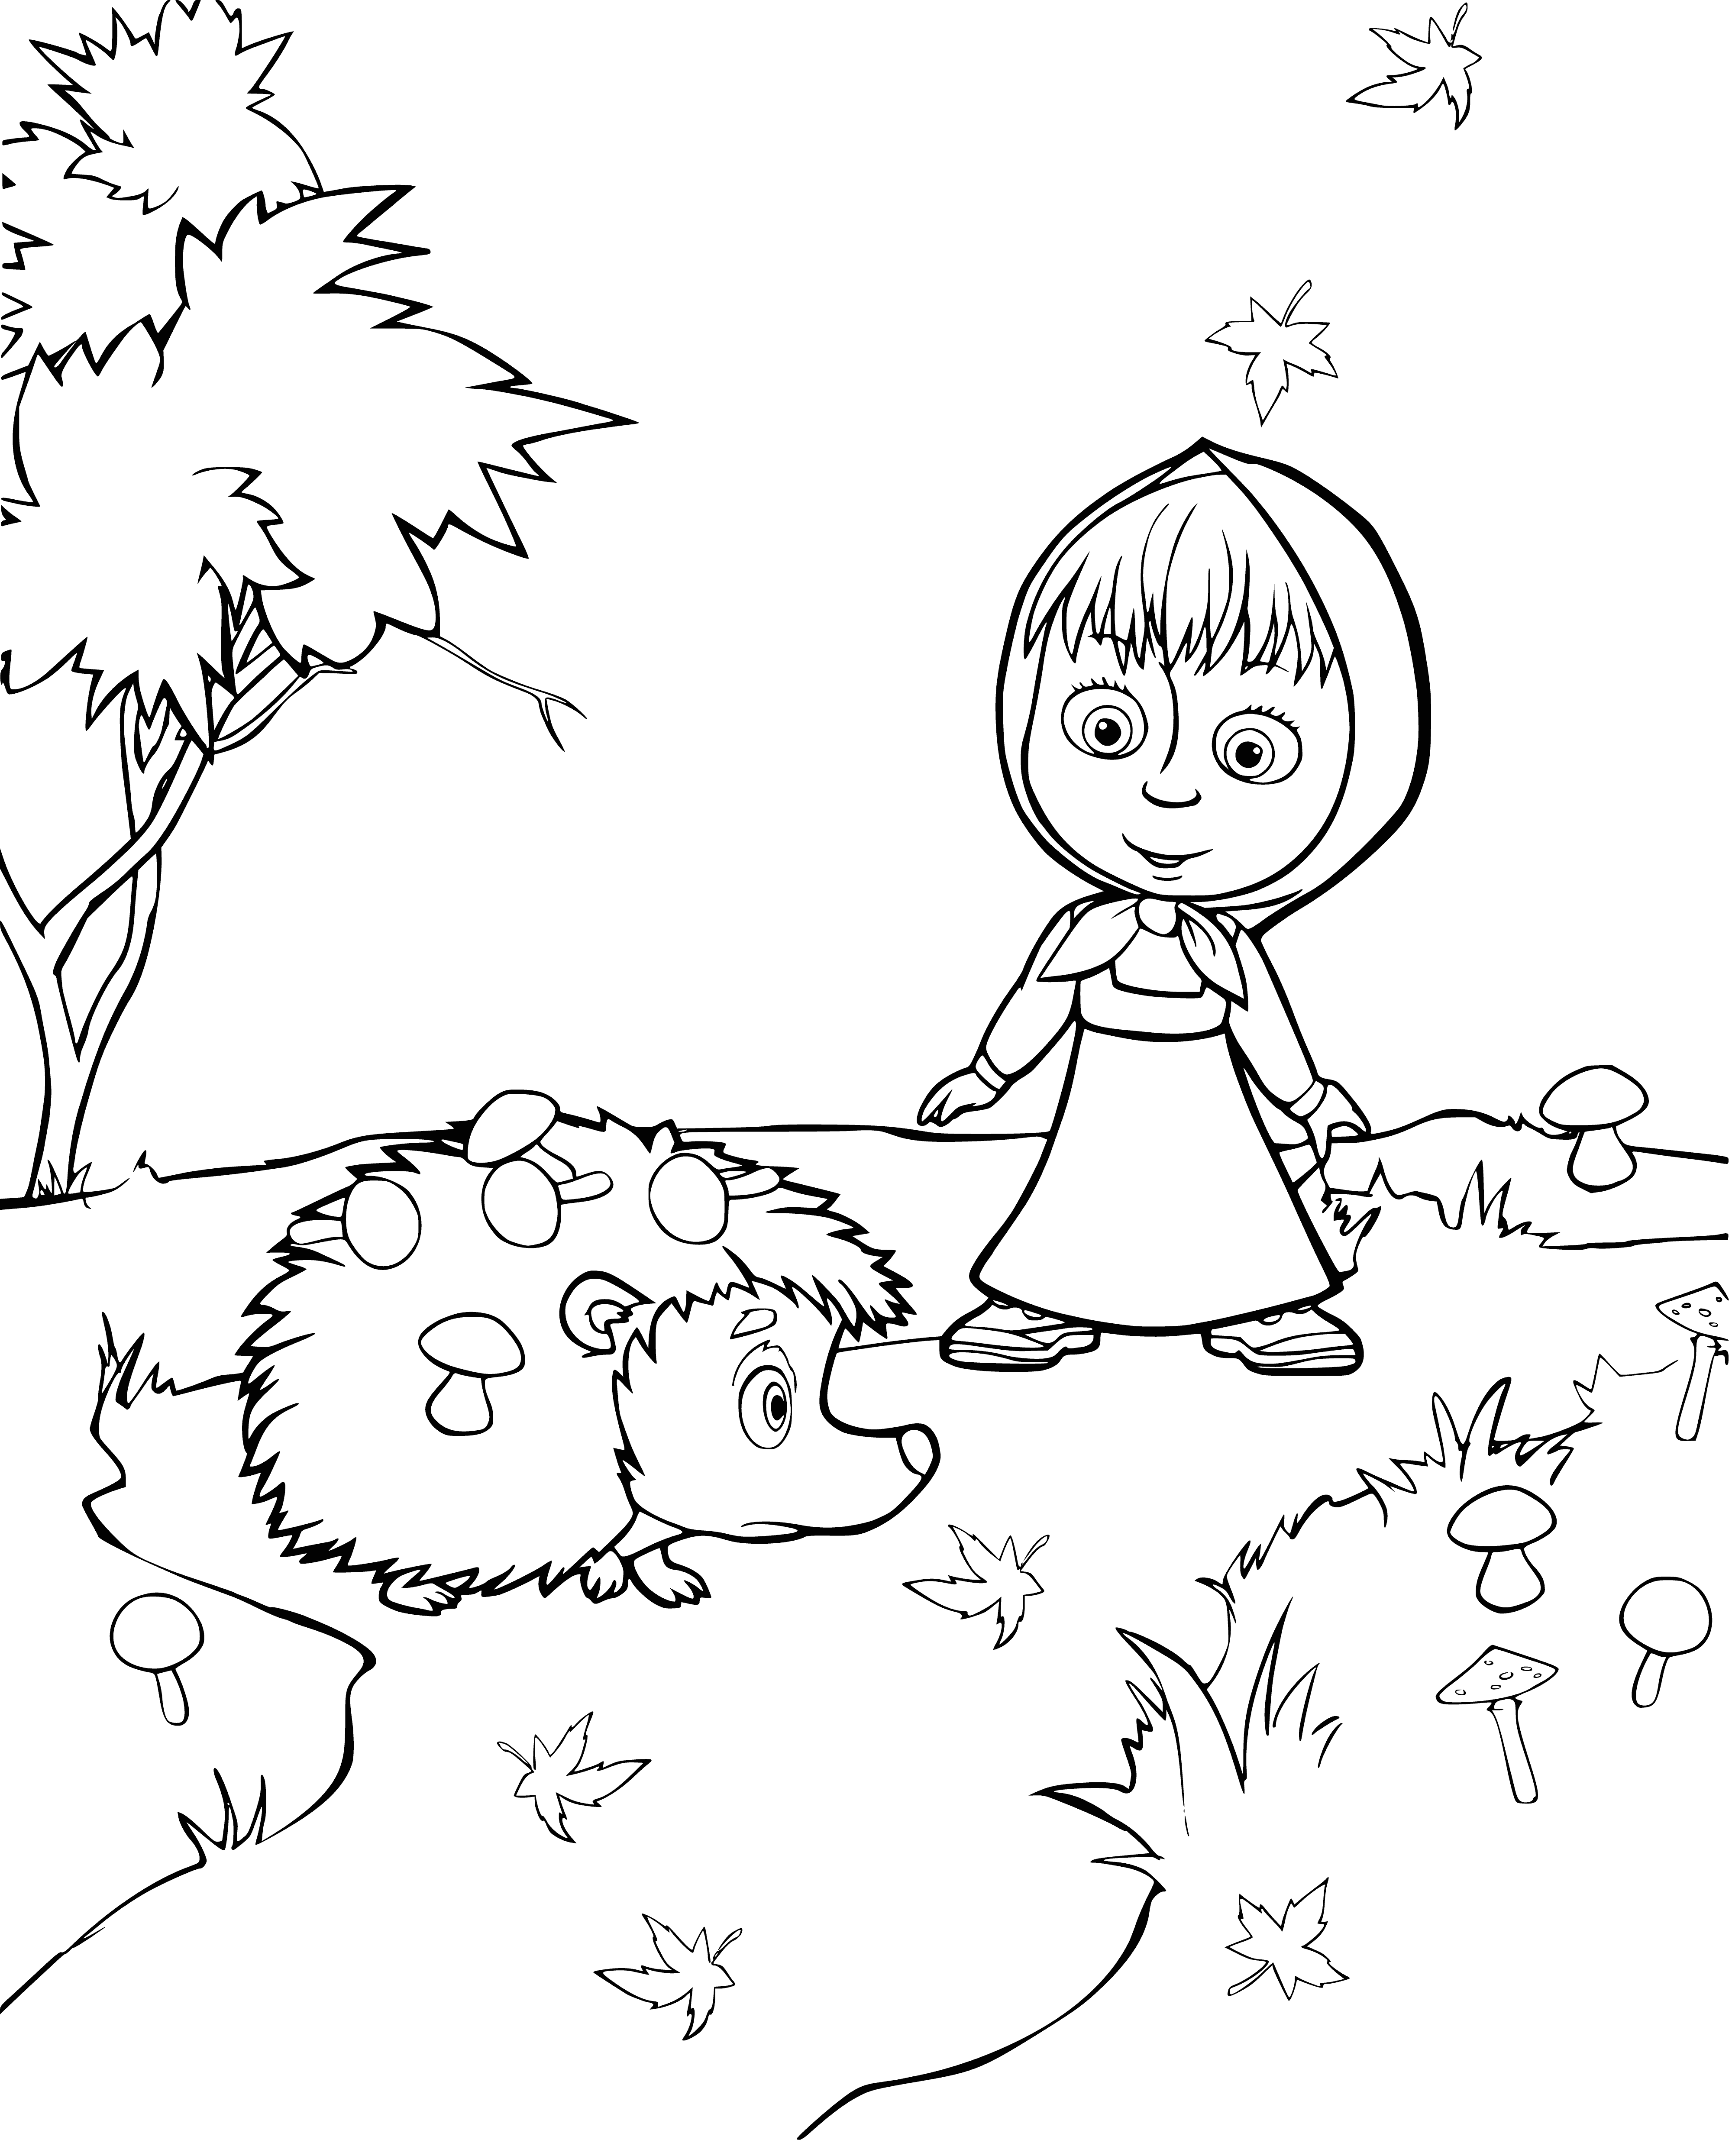 coloring page: Masha kneels by a hedgehog with serious expression. Wears light brown hair & green dress.